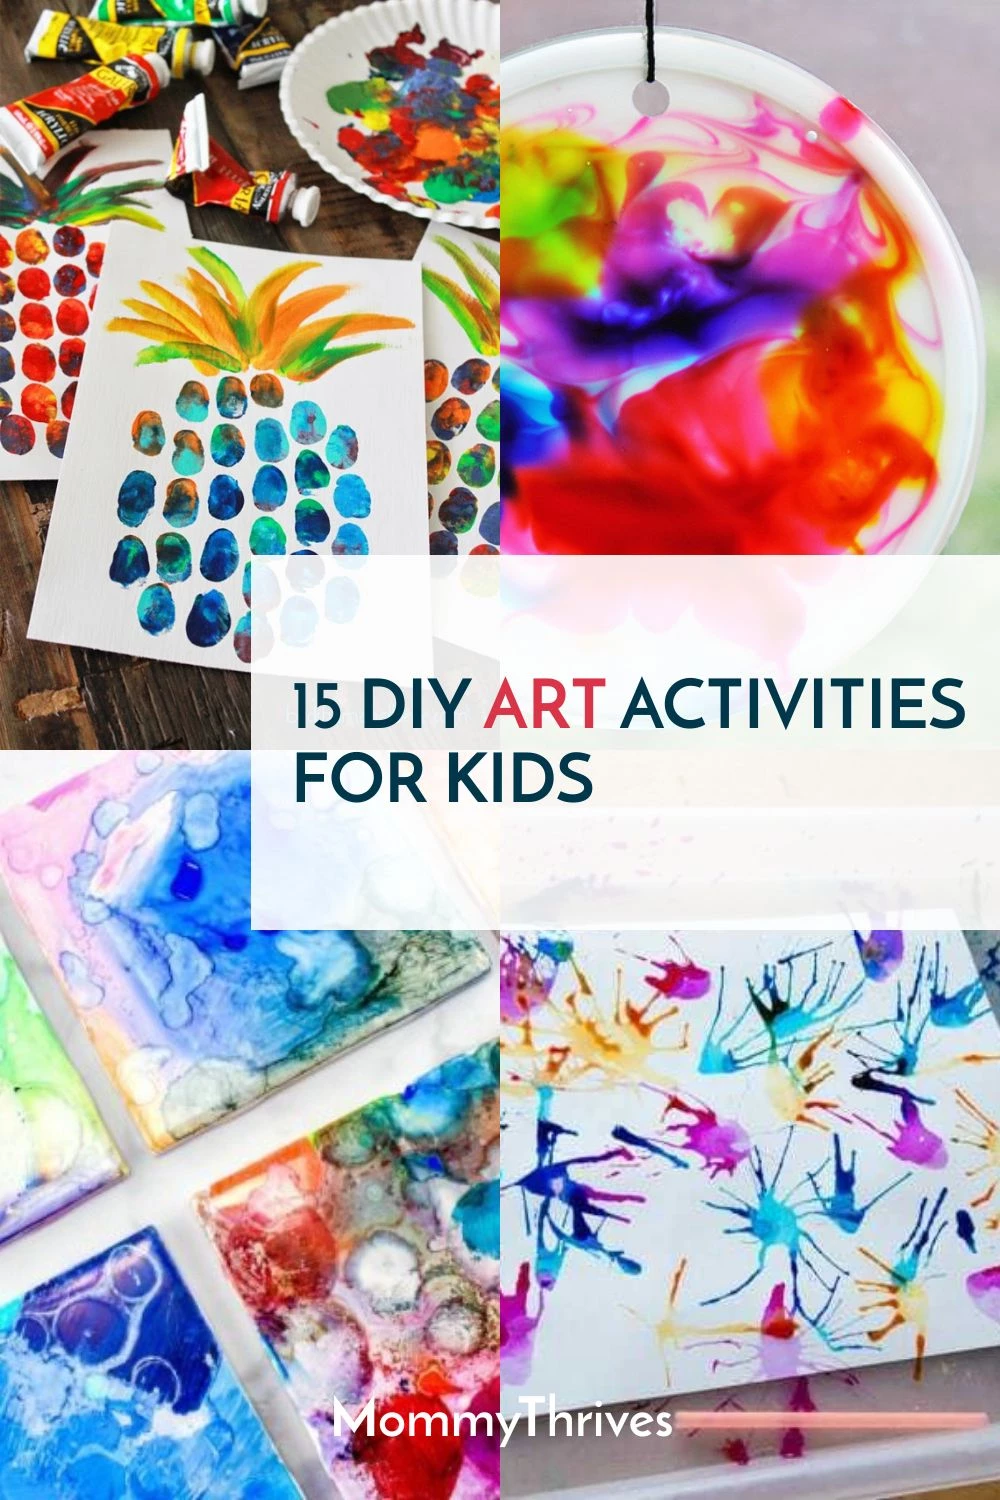 15 Creative Art Projects For Kids - MommyThrives